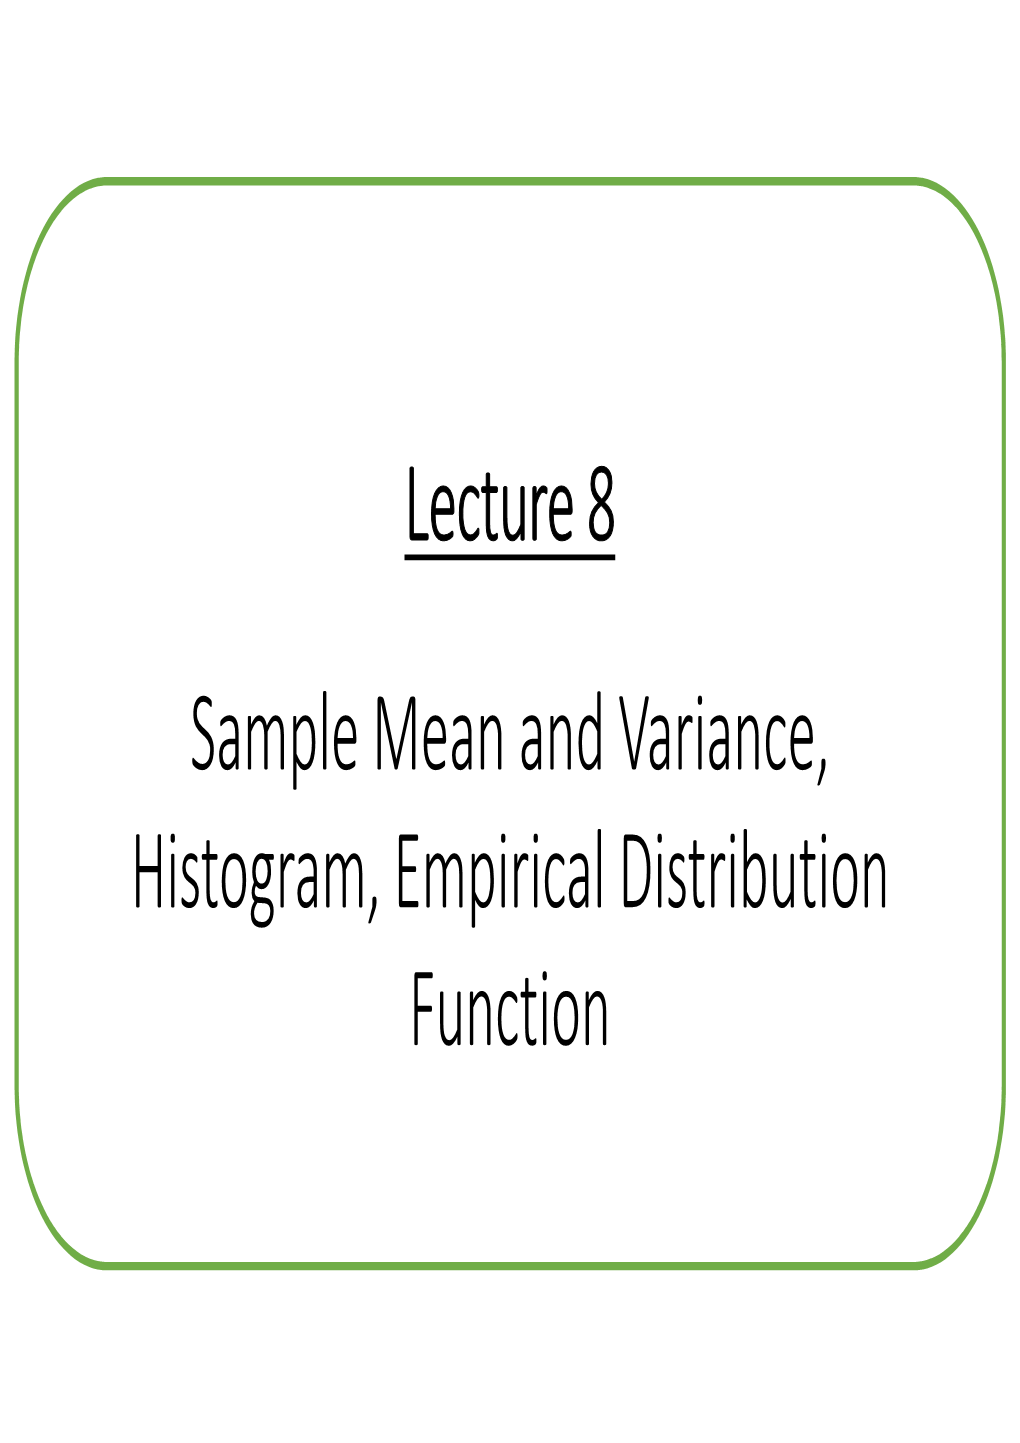 Lecture 8 Sample Mean and Variance, Histogram, Empirical Distribution Function Sample Mean and Variance